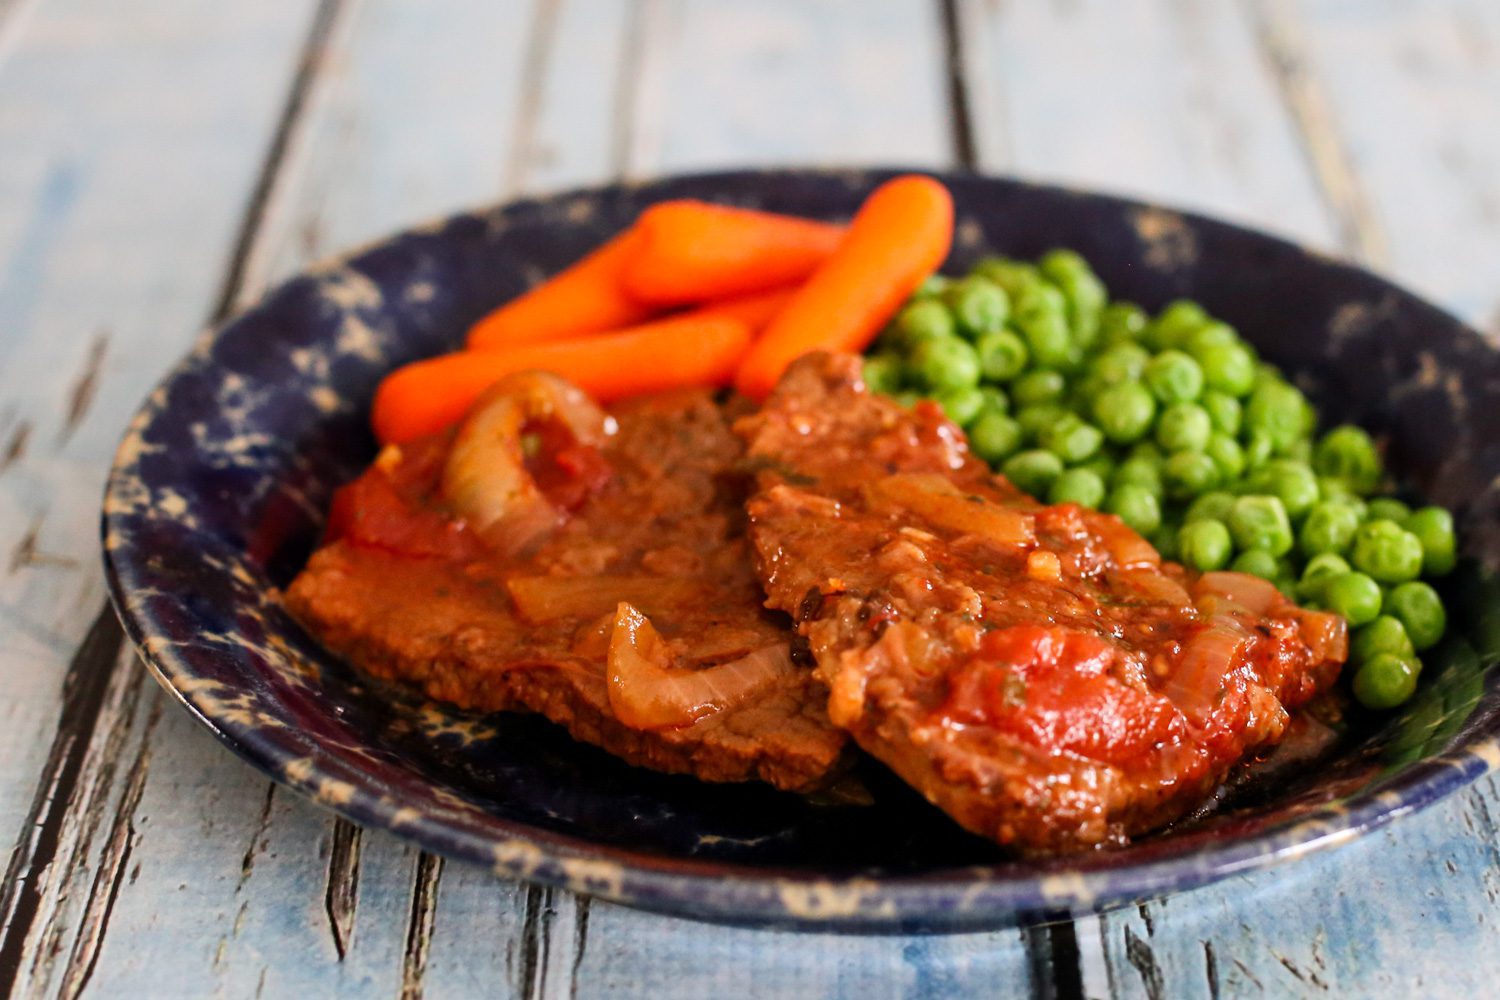 swiss steak on a plate with carrots and peas